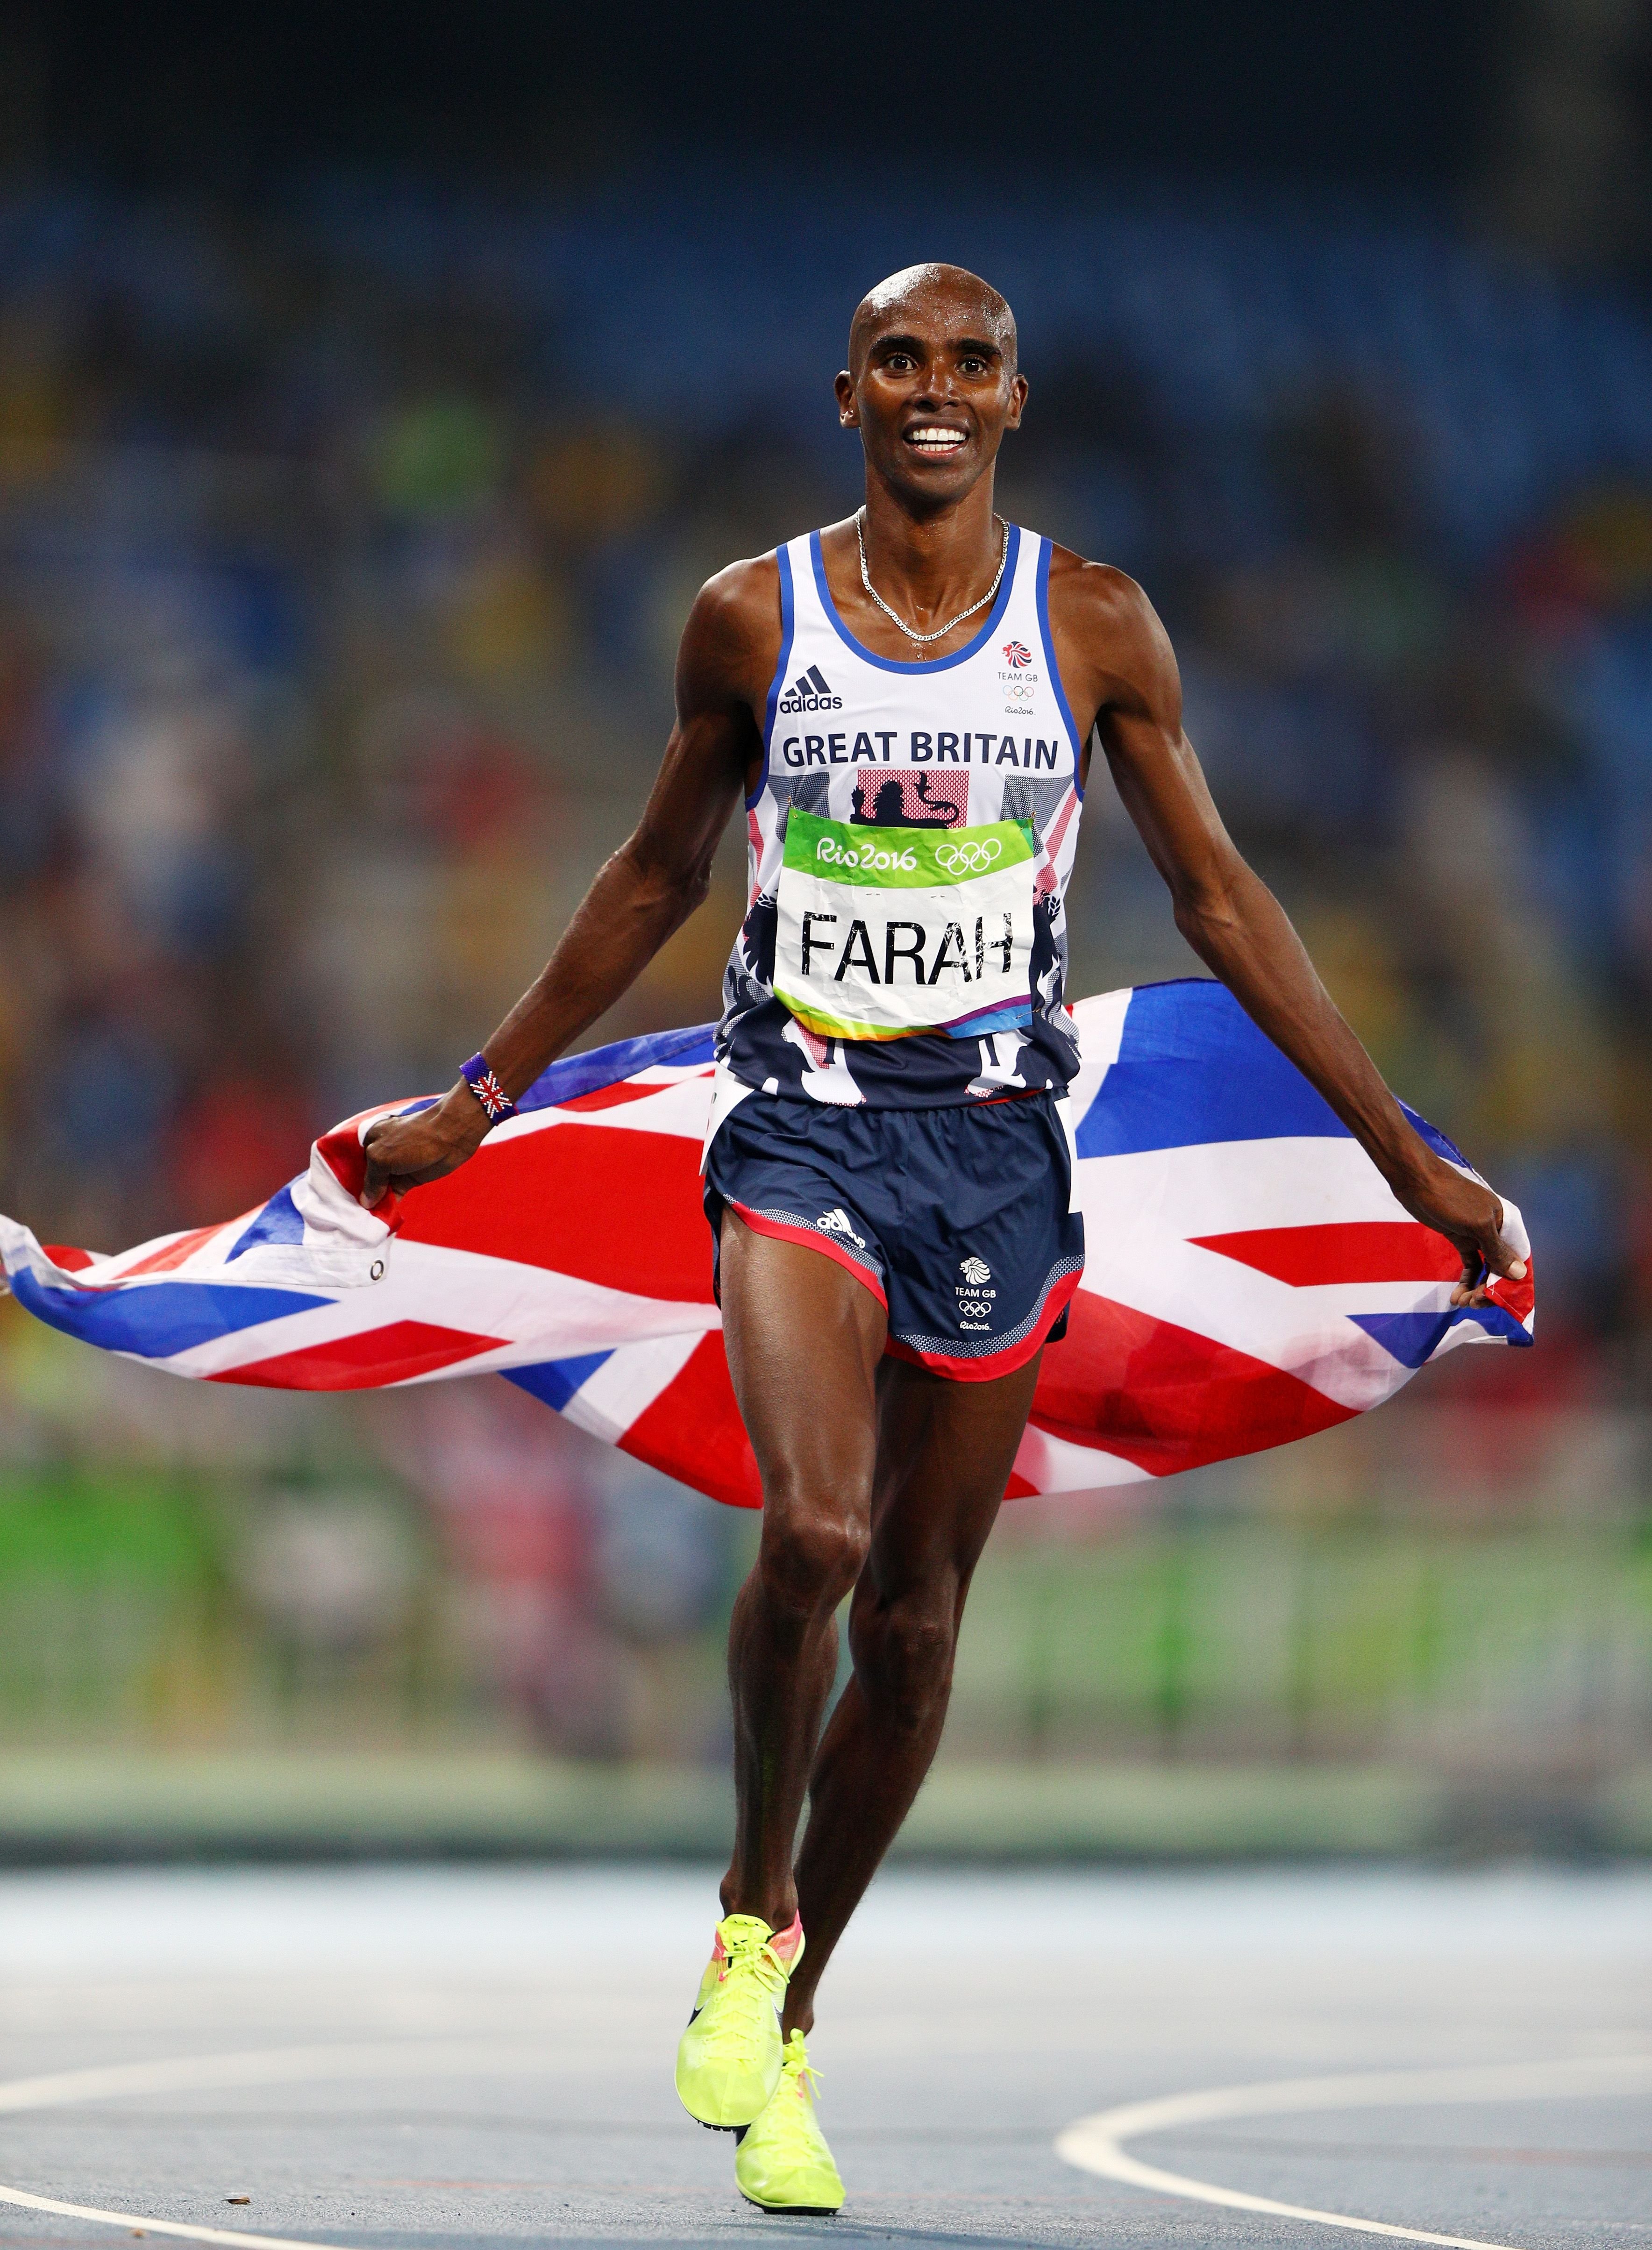 Mohamed Farah of Great Britain after winning gold in the Men's 5000 meter Final of the 2016 Olympic Games on August 20, 2016 in Rio de Janeiro, Brazil | Photo: Getty Images